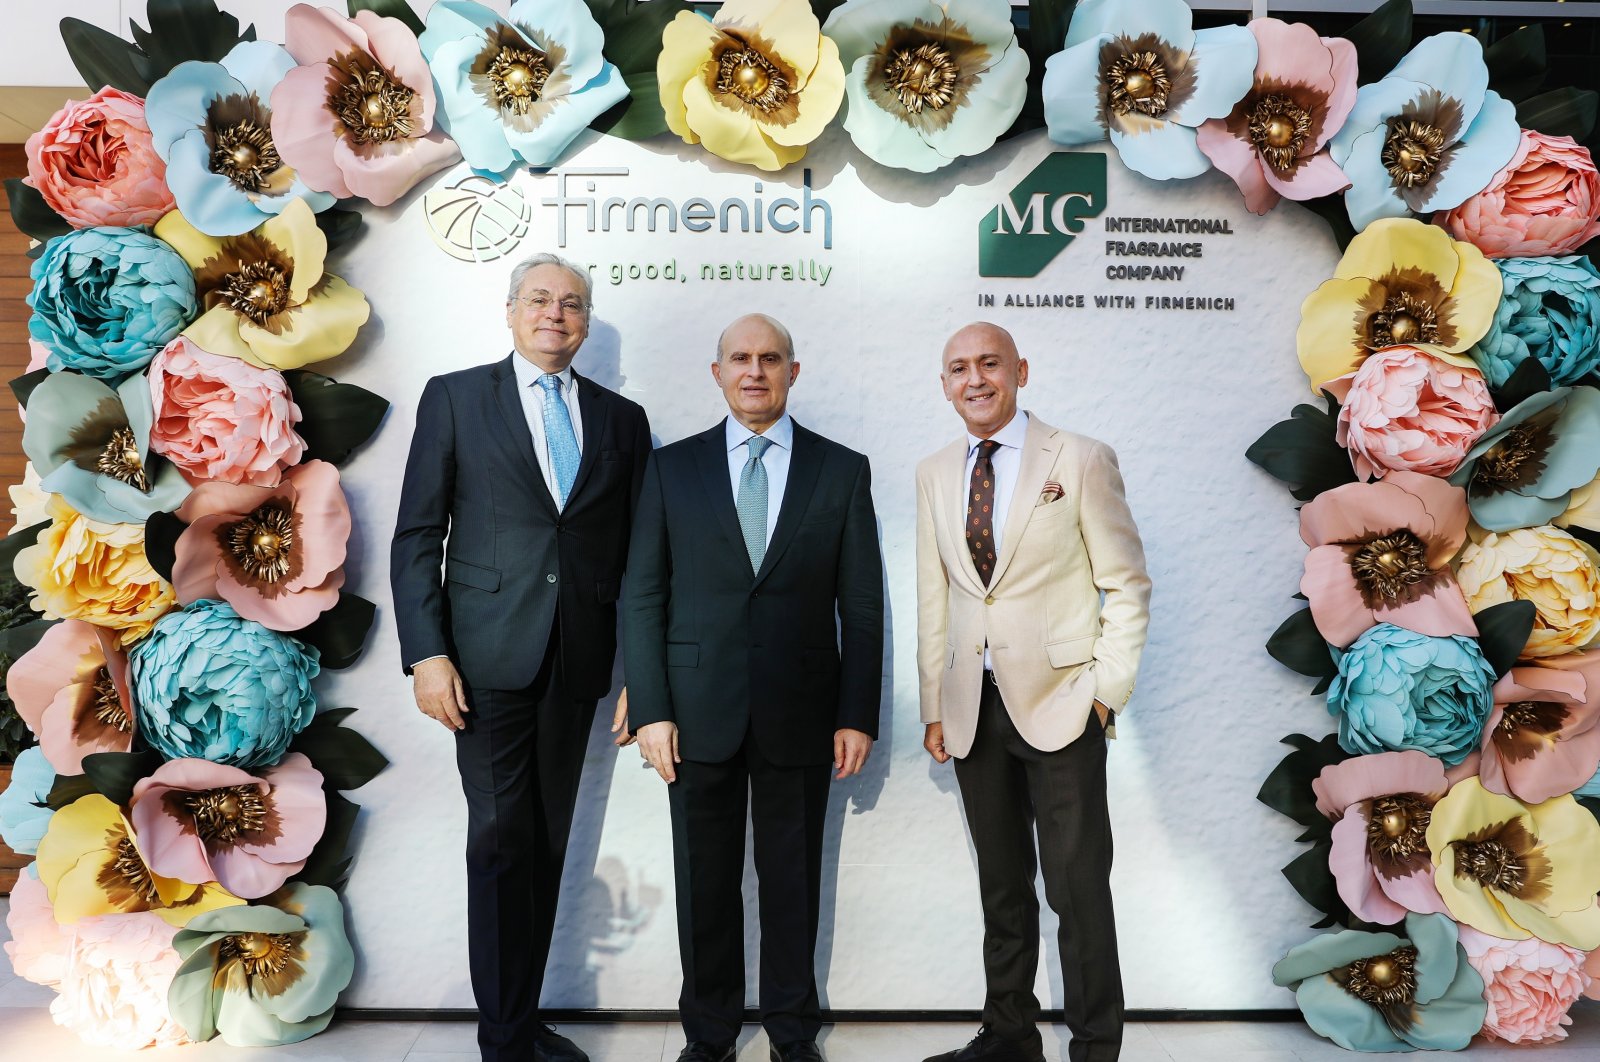 The heads of Firmenich and MG International Fragrance Company at the ceremony in Gebze, Turkey, Nov. 6, 2021. (DHA Photo)